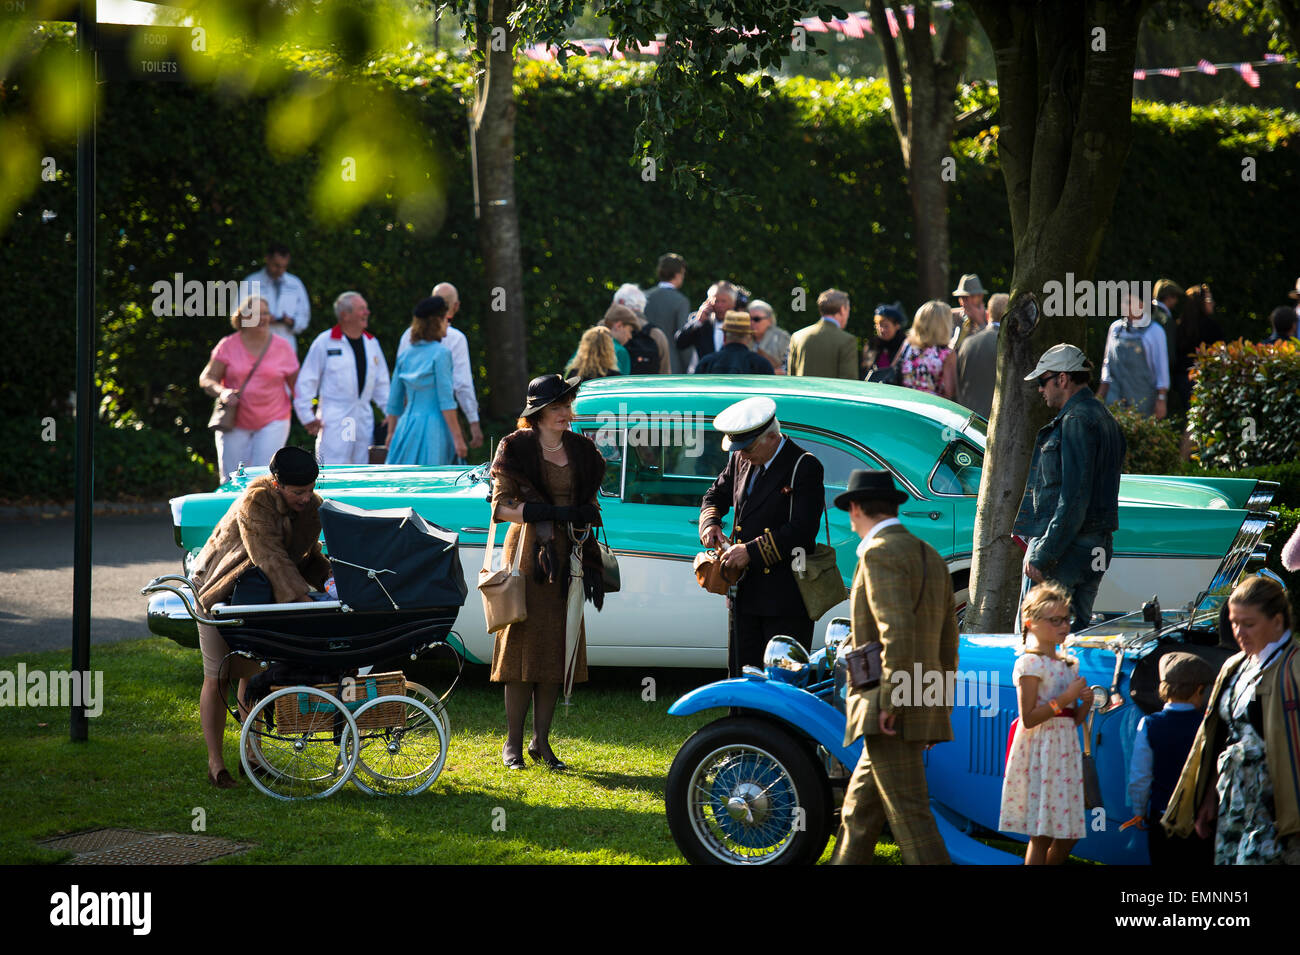 CHICHESTER, ENGLAND - September 12-14, 2014: Historic automobile racing festivities on and off the track for the Goodwood Revival. The Revival celebrates the golden age of motorsport at the Goodwood Motor Circuit, from 1948 to 1966. Stock Photo